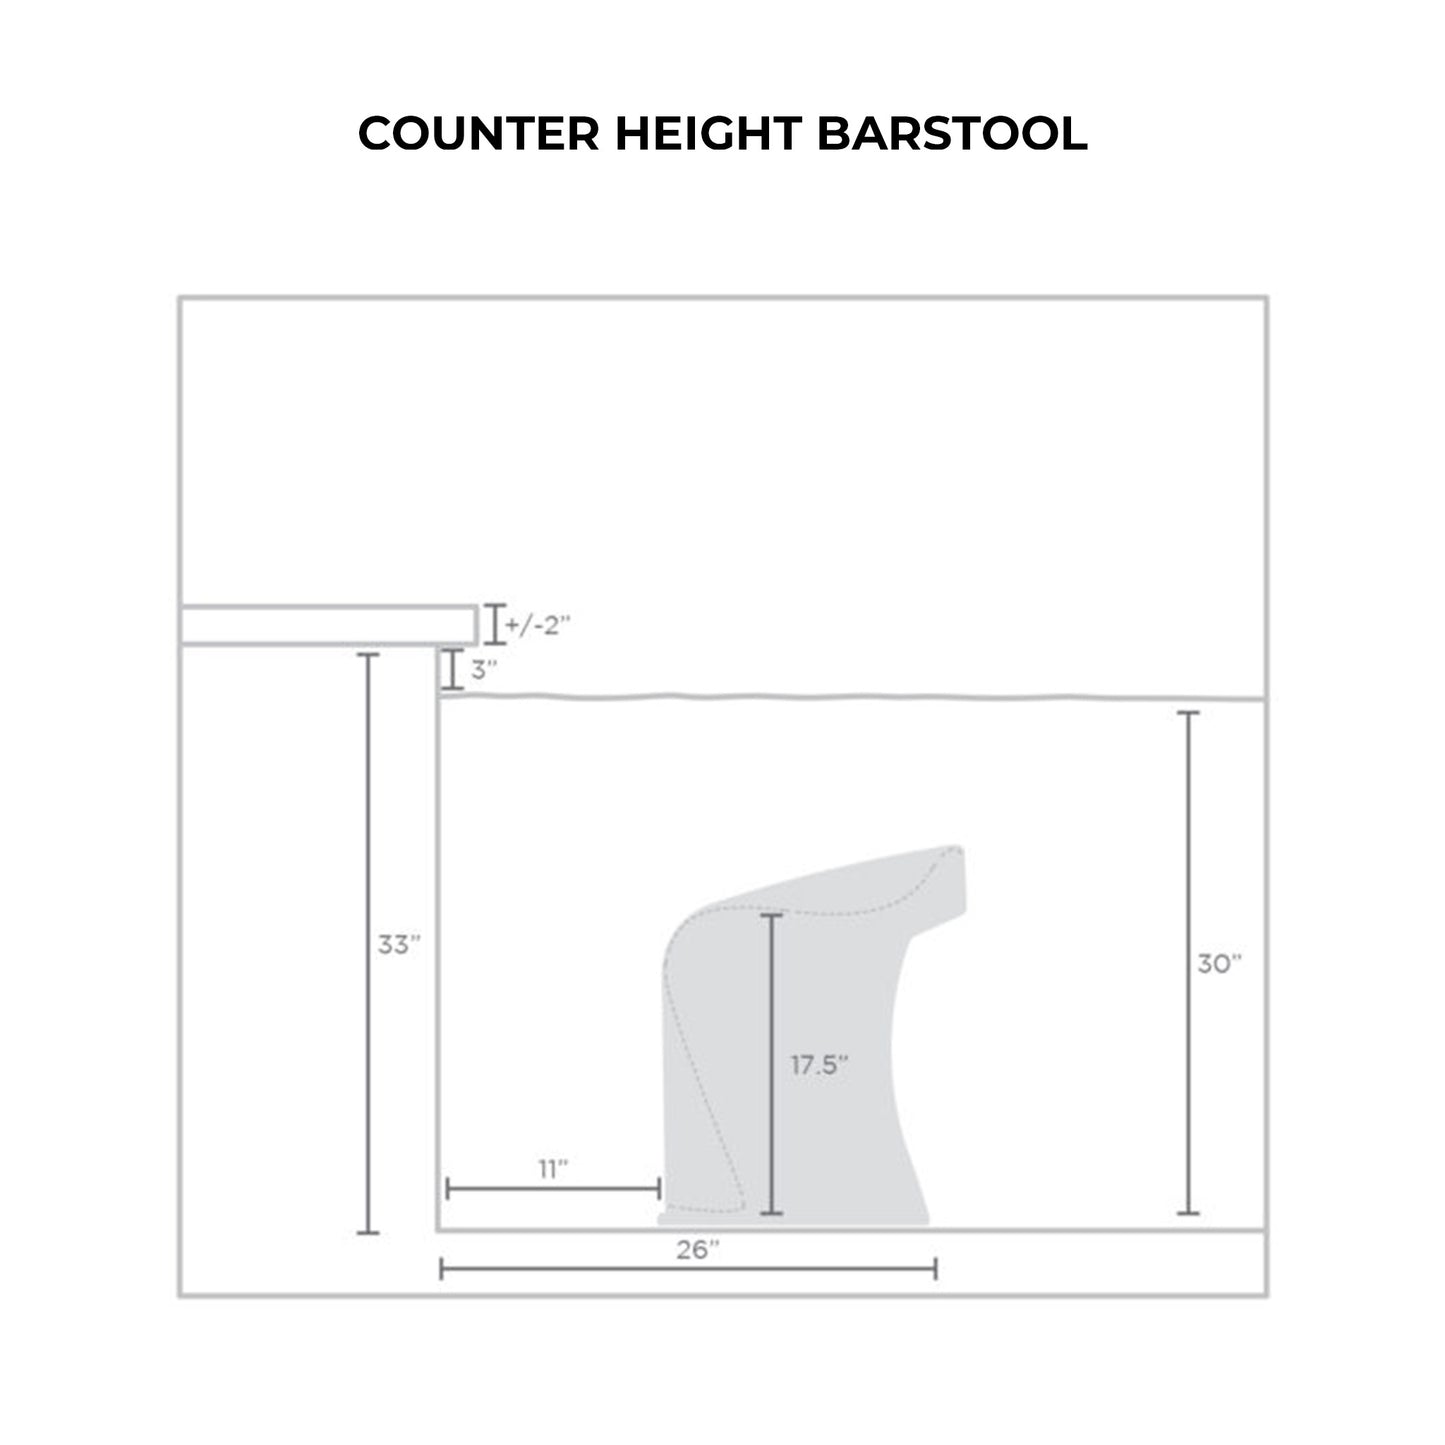 Ledge Lounger Signature Barstool - Counter Height dimensions